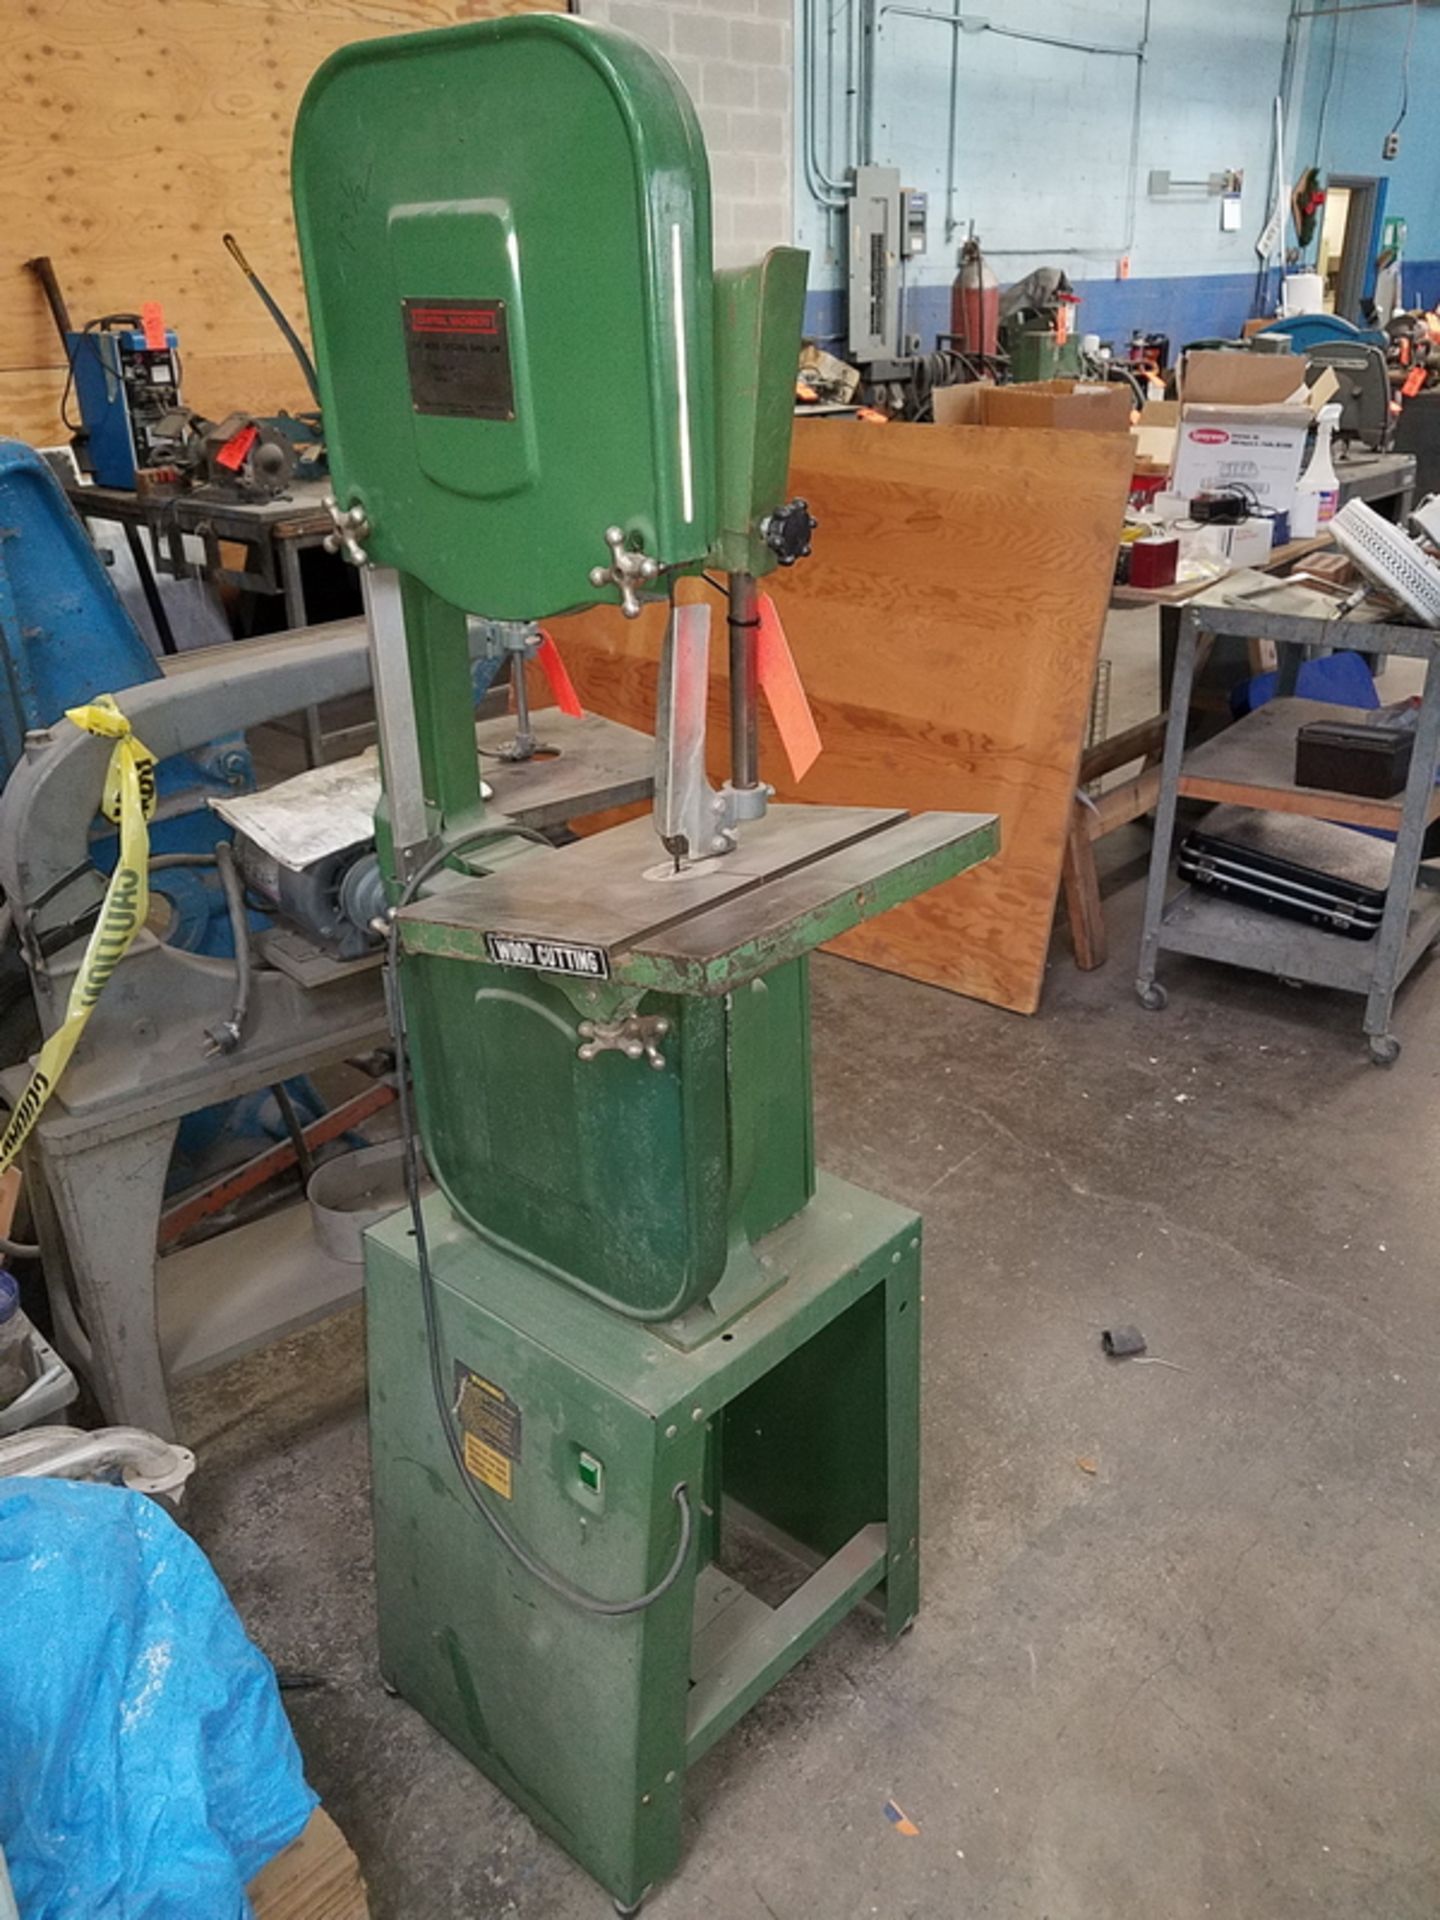 Central Machinery 14 in. Model 1502 Wood Cutting Band Saw, 120-Volt - Image 2 of 2